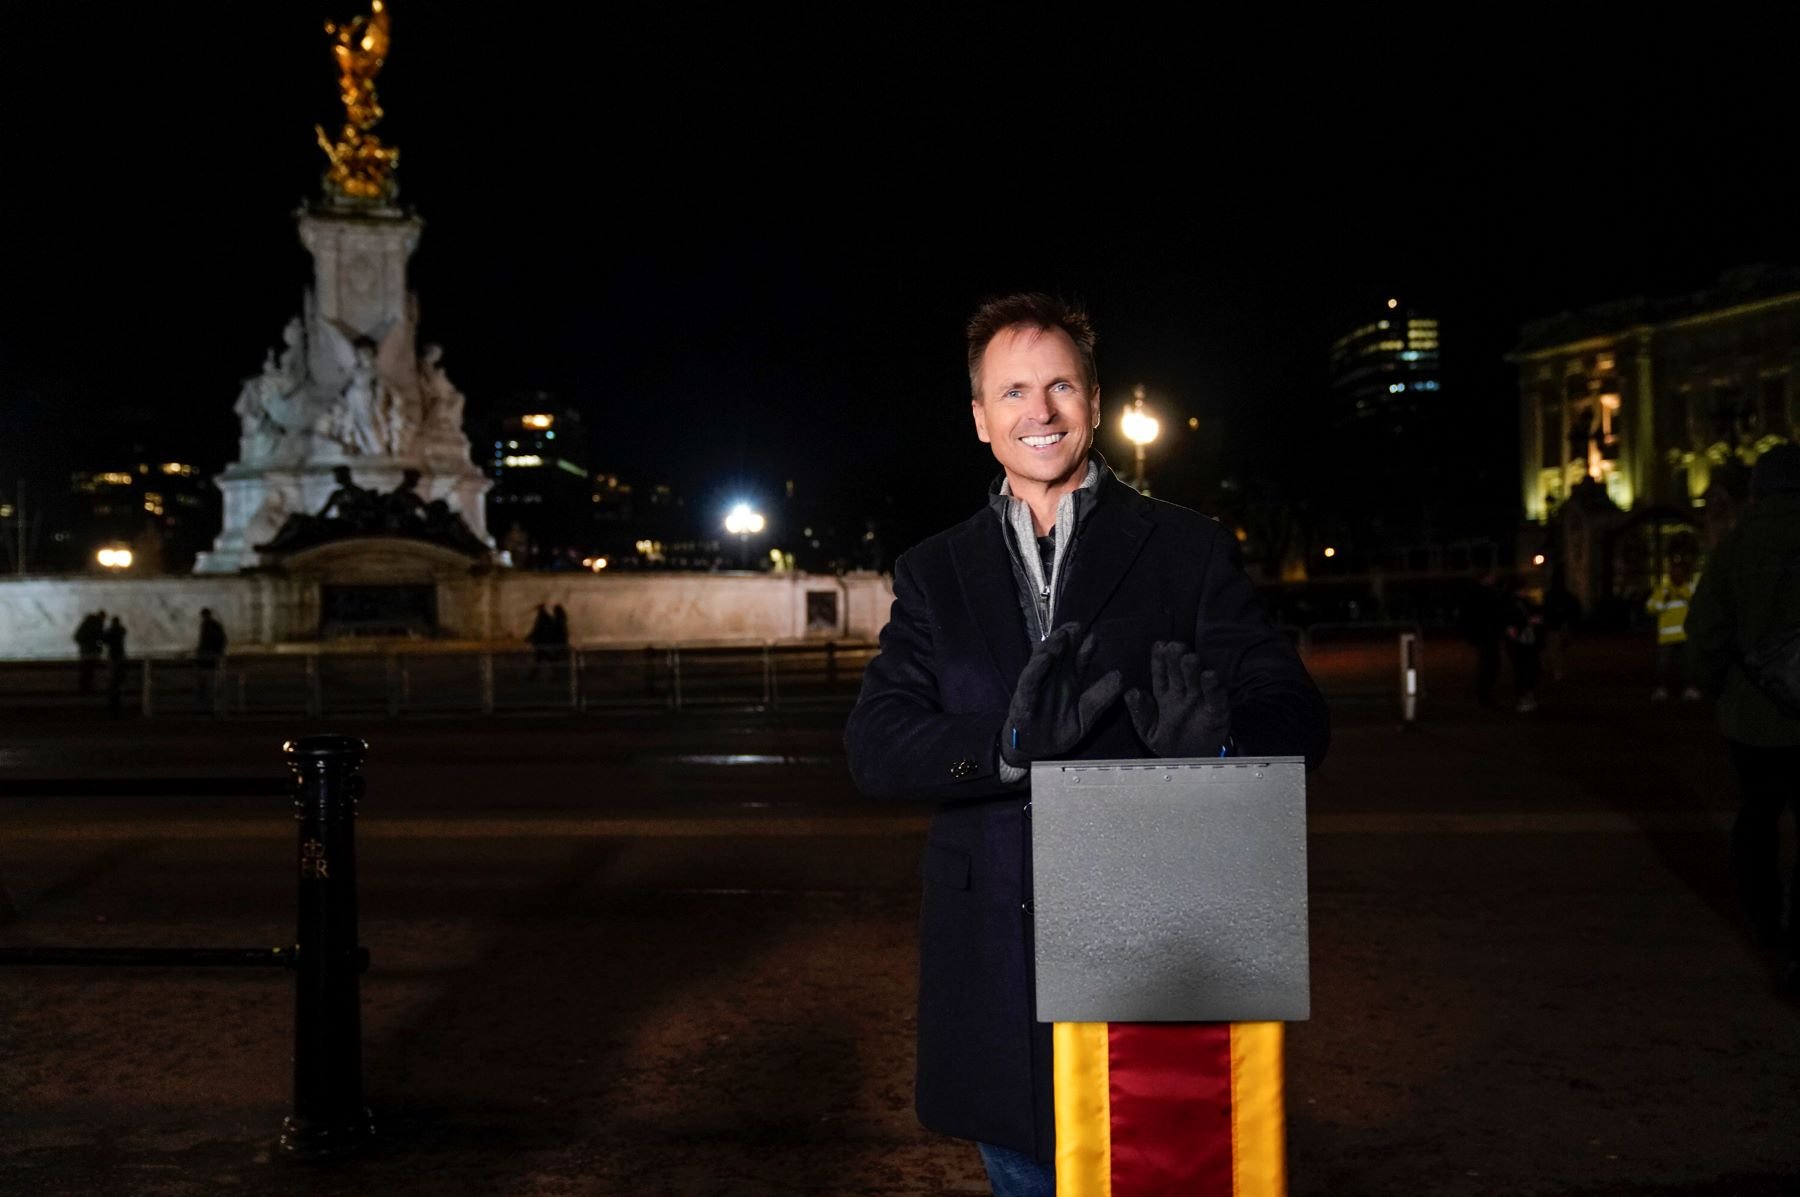 Phil Keoghan, the host of 'The Amazing Race' on CBS, wears a black coat